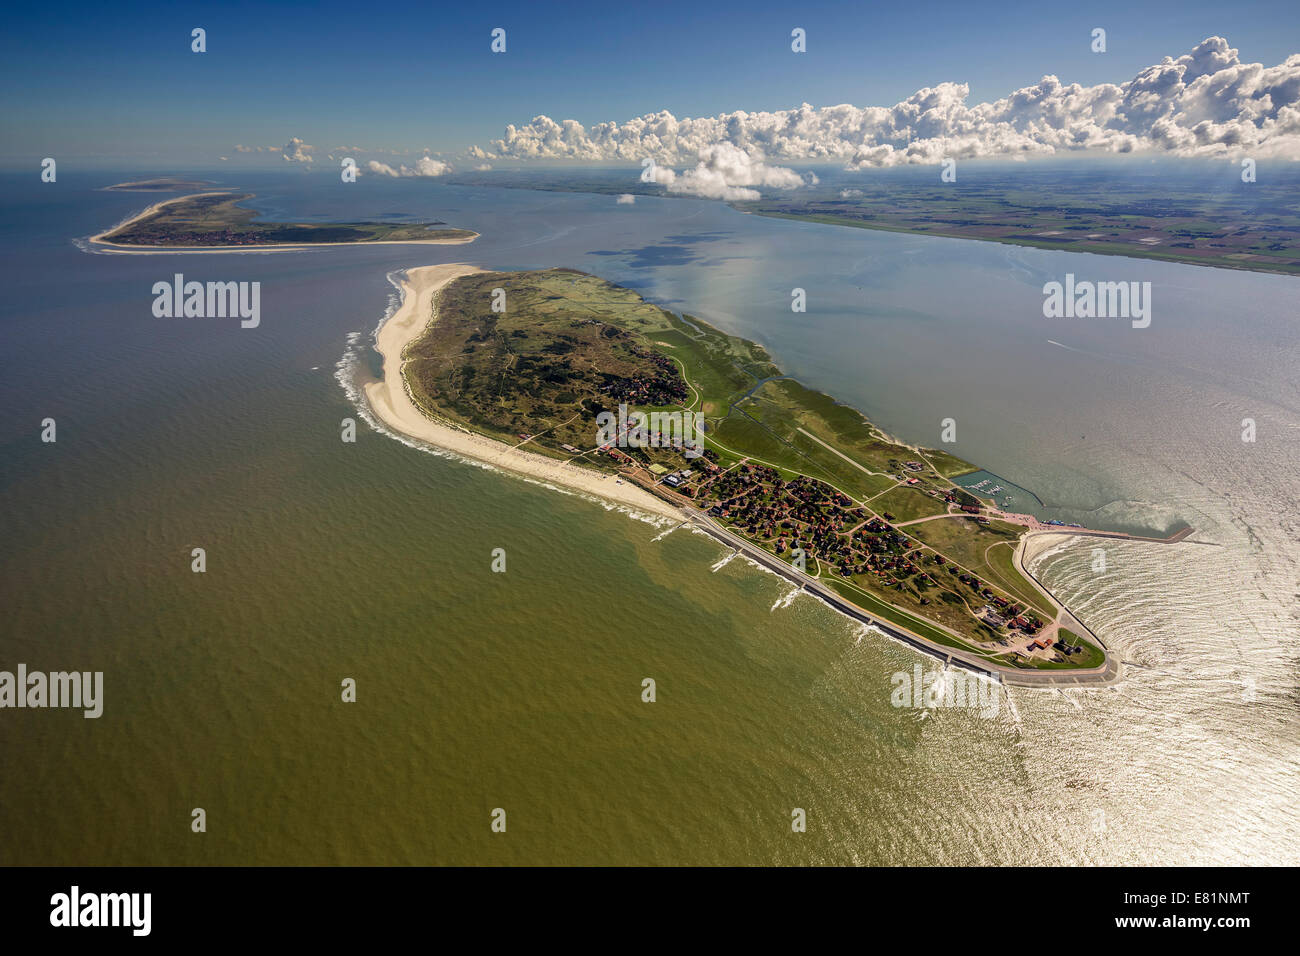 Aerial view, groynes protection against land being washed away, Wadden Sea, Baltrum, island in the North Sea Stock Photo